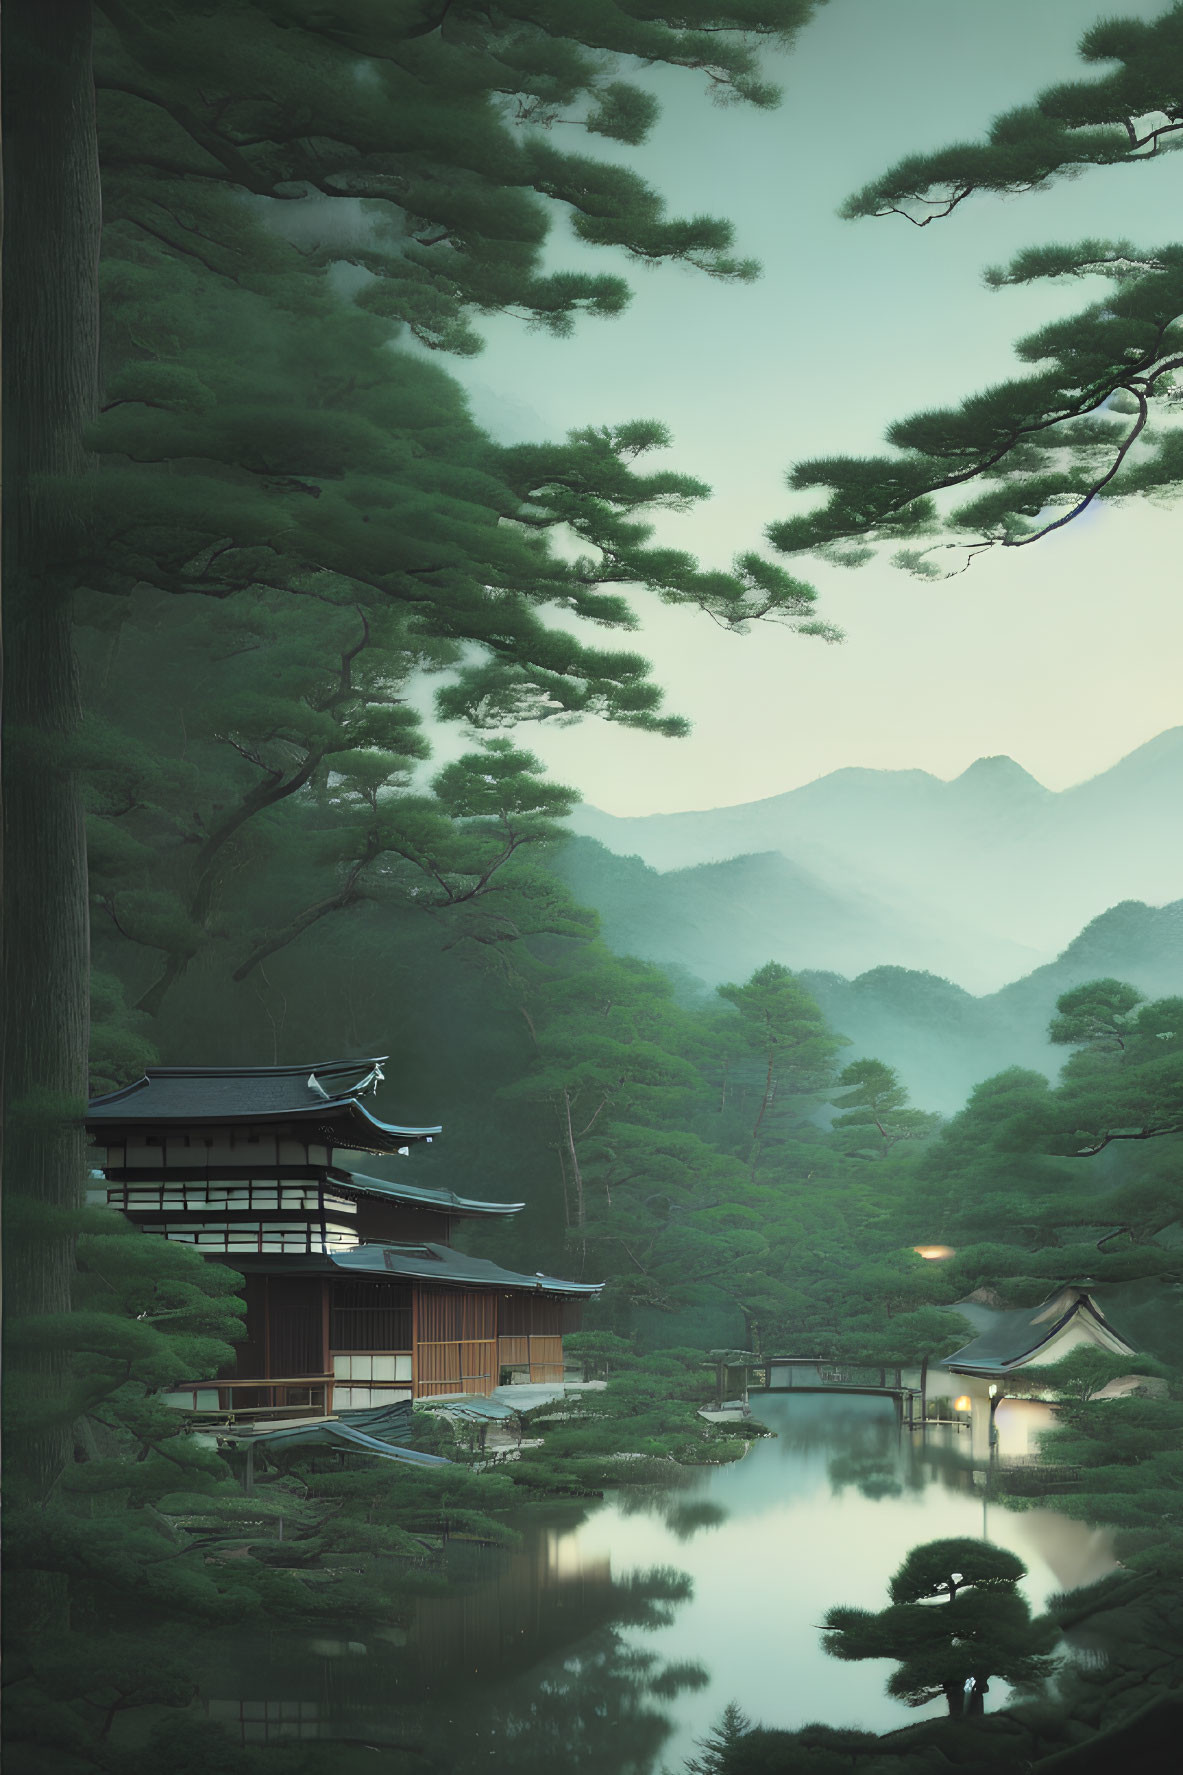 Japanese architecture with multi-tiered roof near lake and pine trees in misty forest.